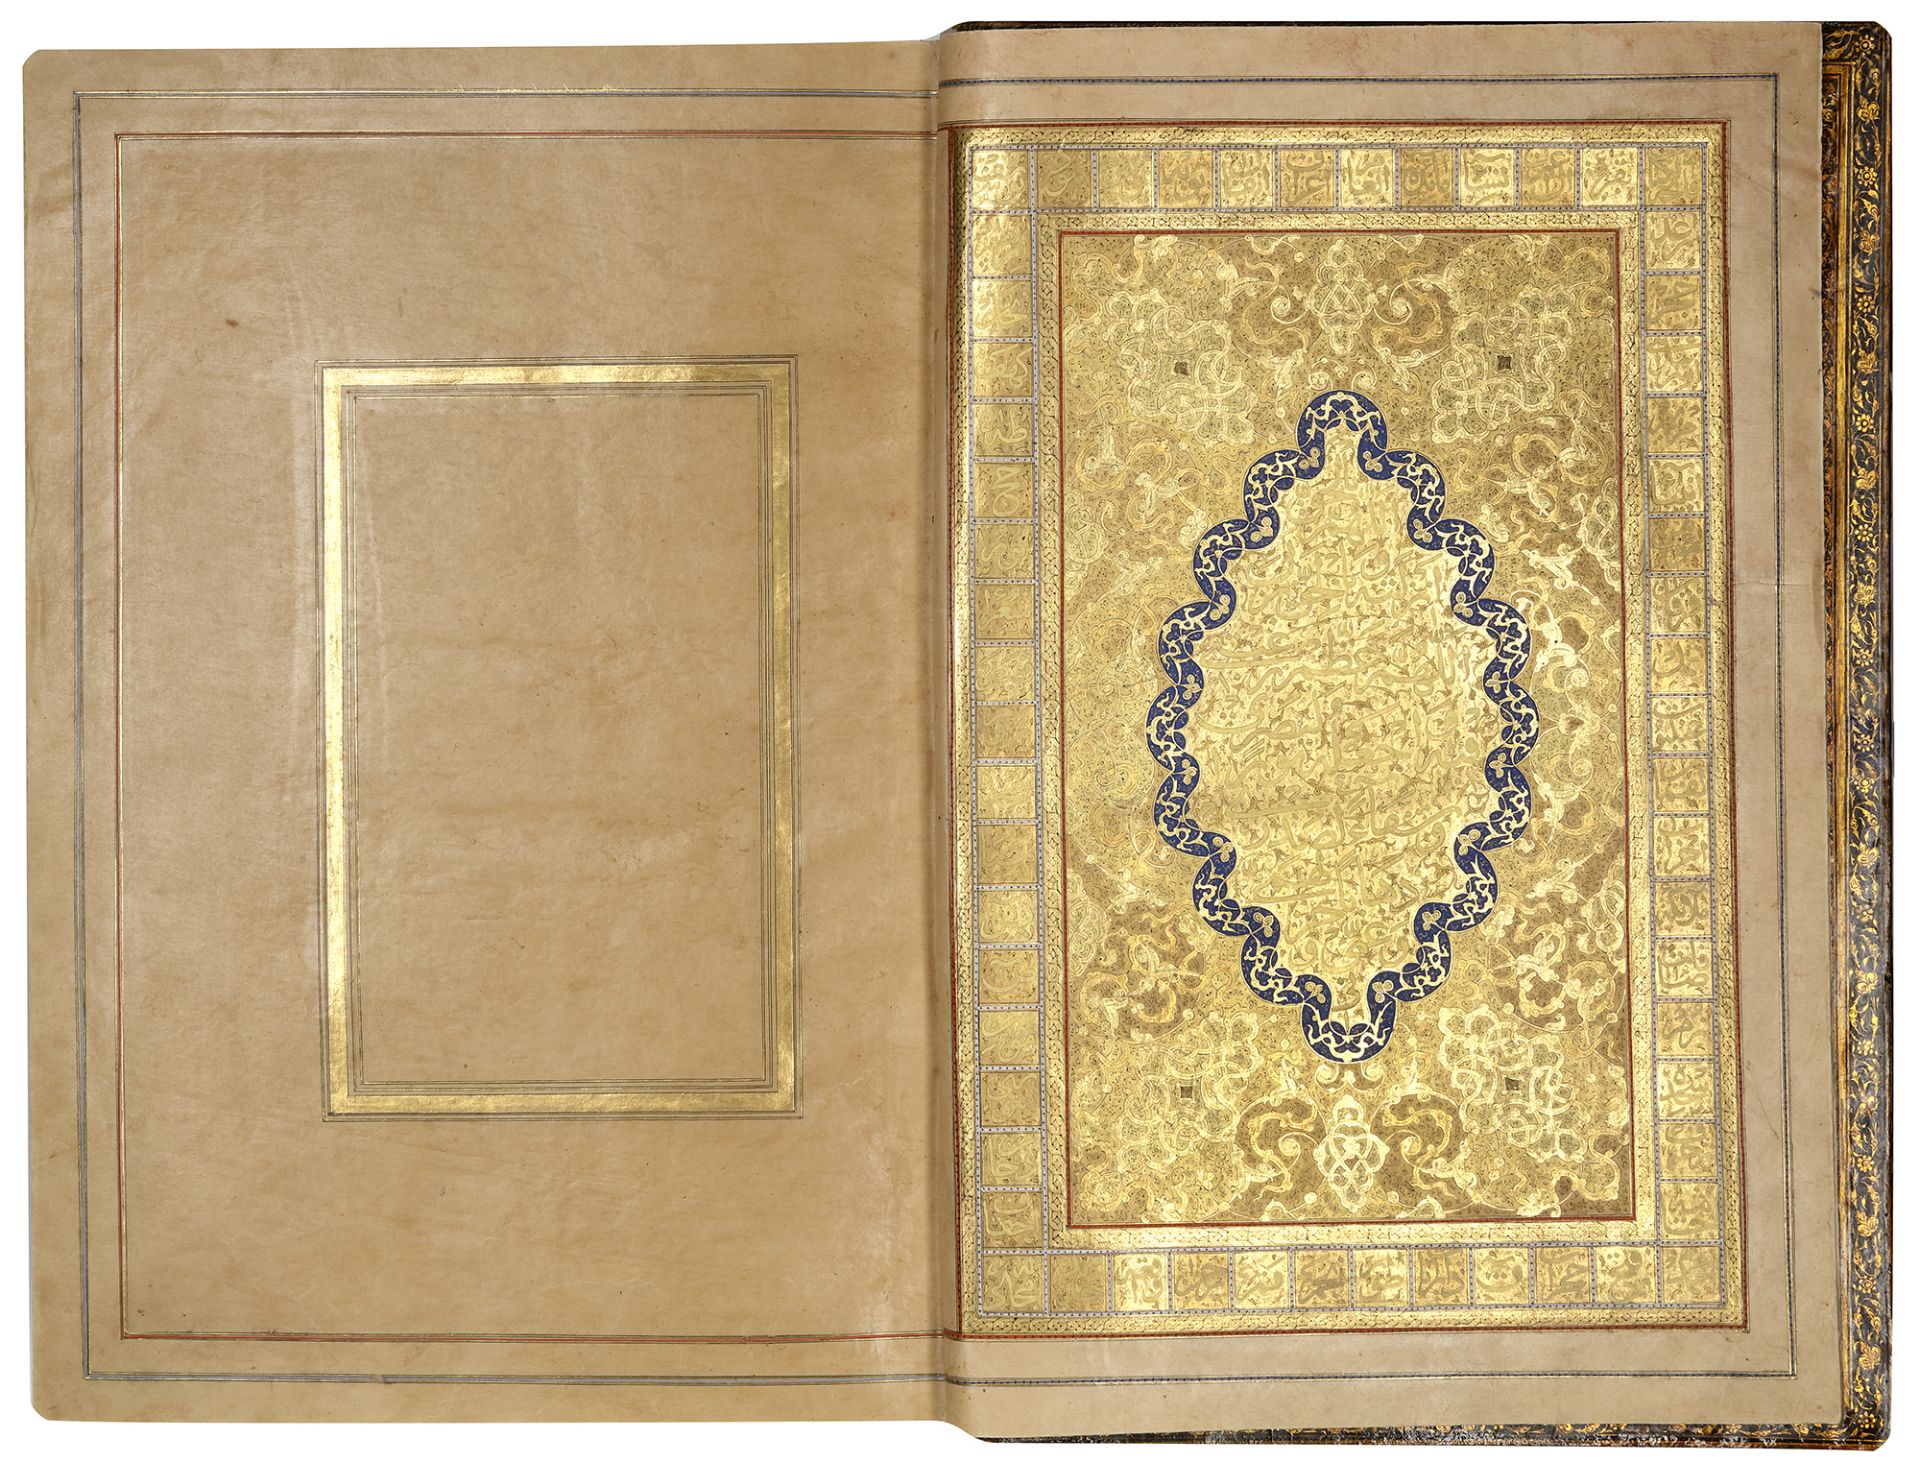 AN EXCEPTIONAL ILLUMINATED SAFAVID QURAN (POSSIBLY SHIRAZ), SECOND HALF 16TH CENTURY, WITH AN ADDITI - Image 3 of 14